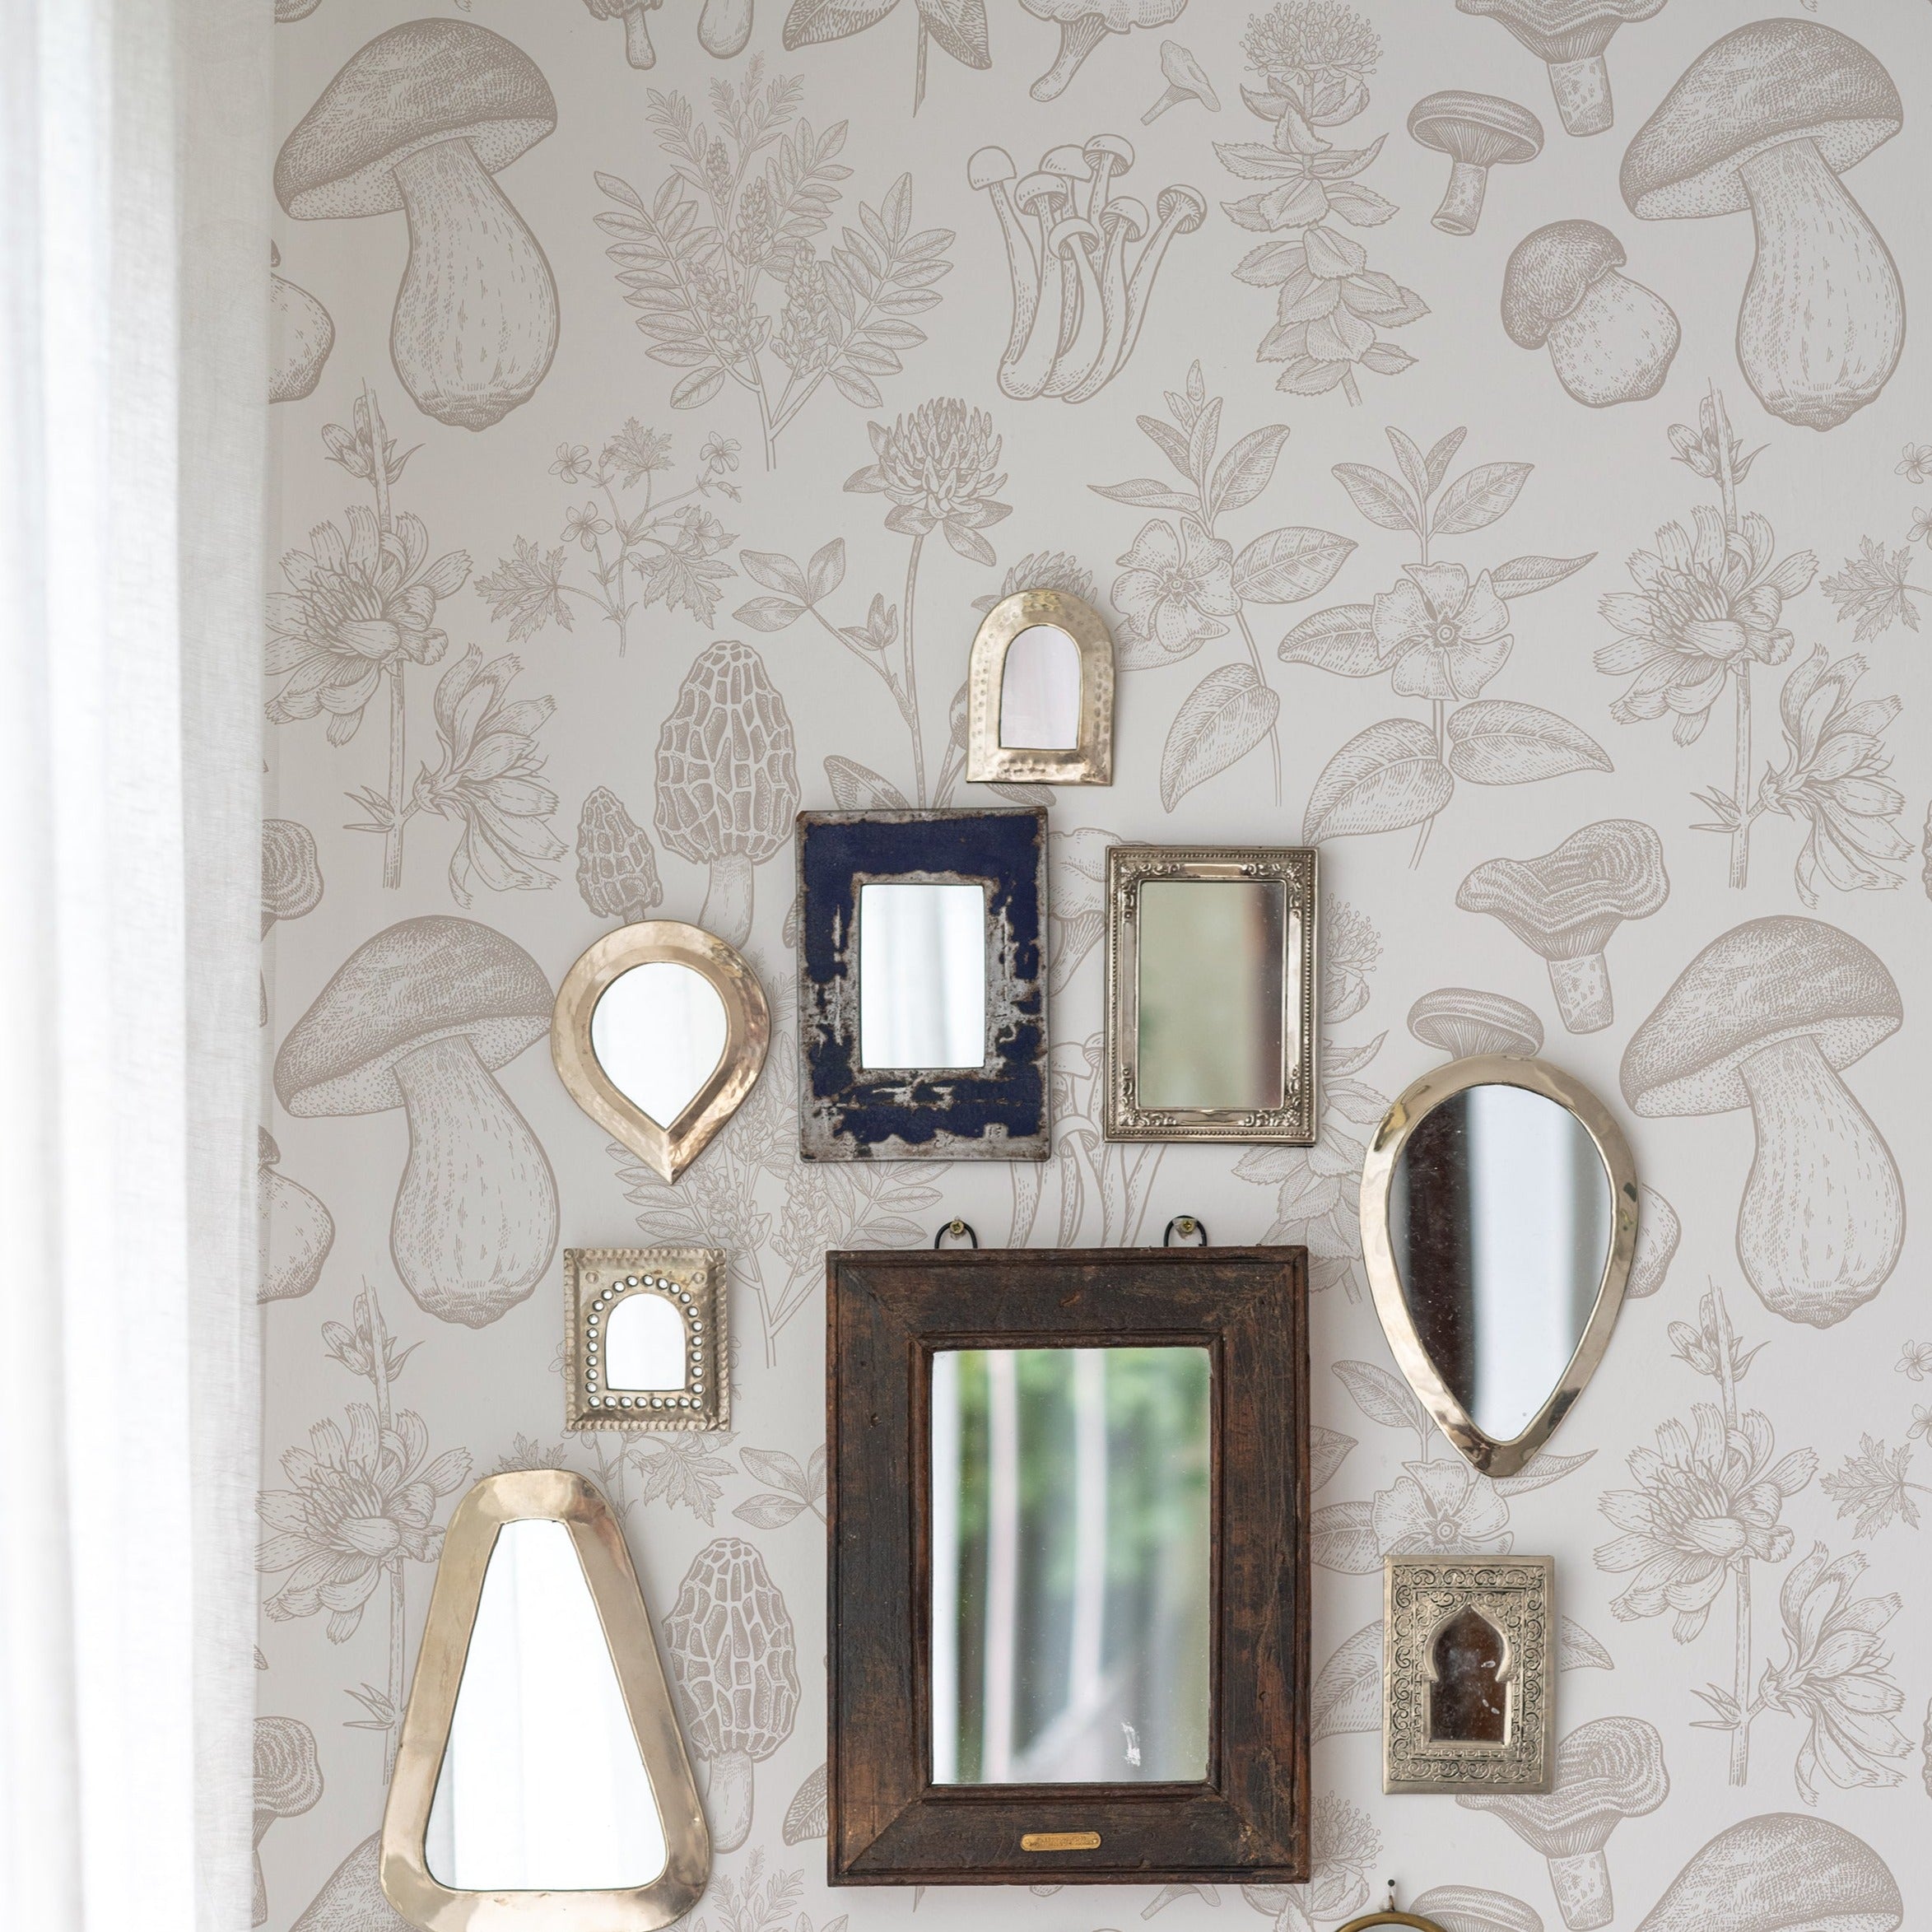 An eclectic collection of vintage mirrors in various shapes and sizes adorns a wall covered with 'Mushroom Garden Wallpaper'. The wallpaper features a detailed botanical print with various species of mushrooms and plants in shades of beige, providing a whimsical backdrop.